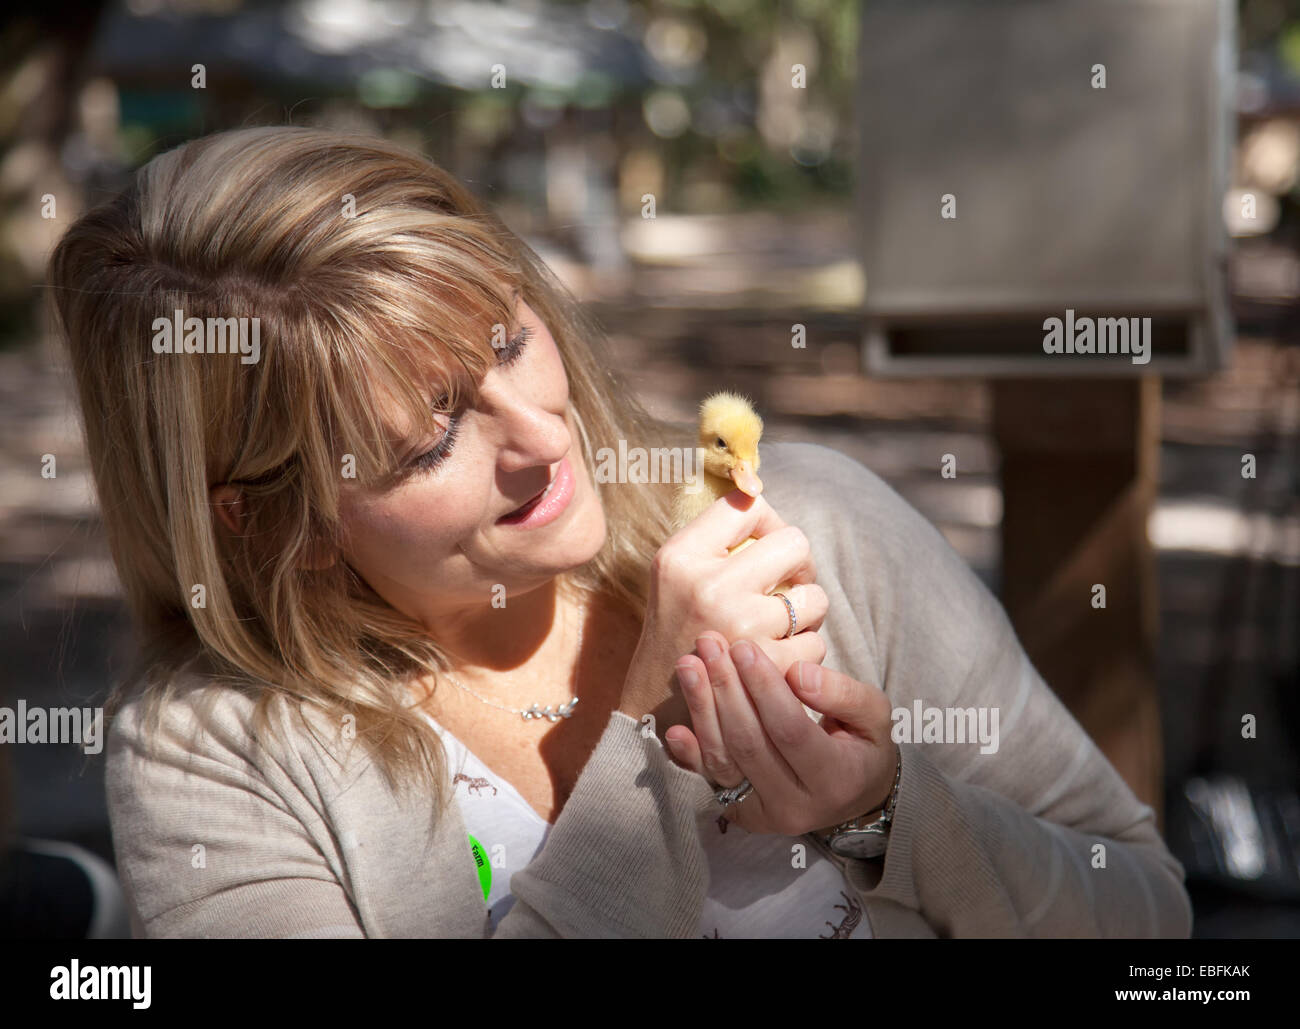 Woman holding baby duck Stock Photo